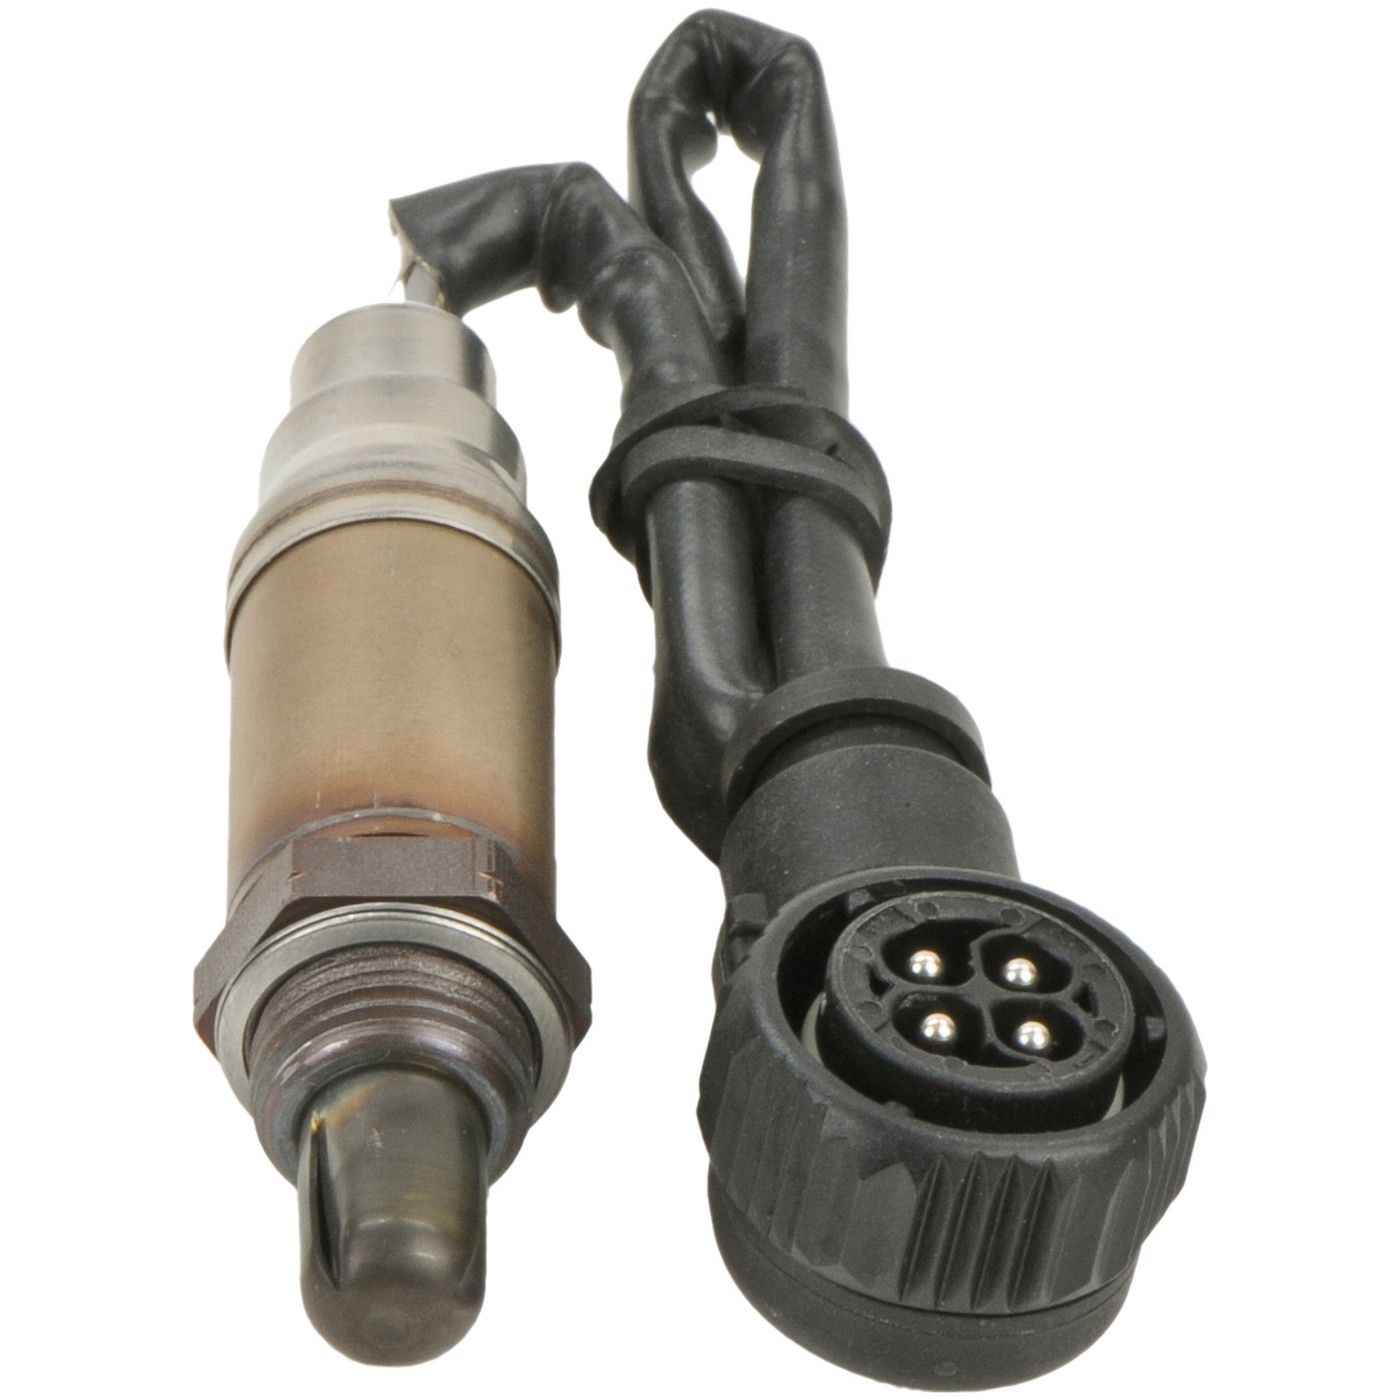 How to replace 1993 mercedes benz oxygen sensor #5